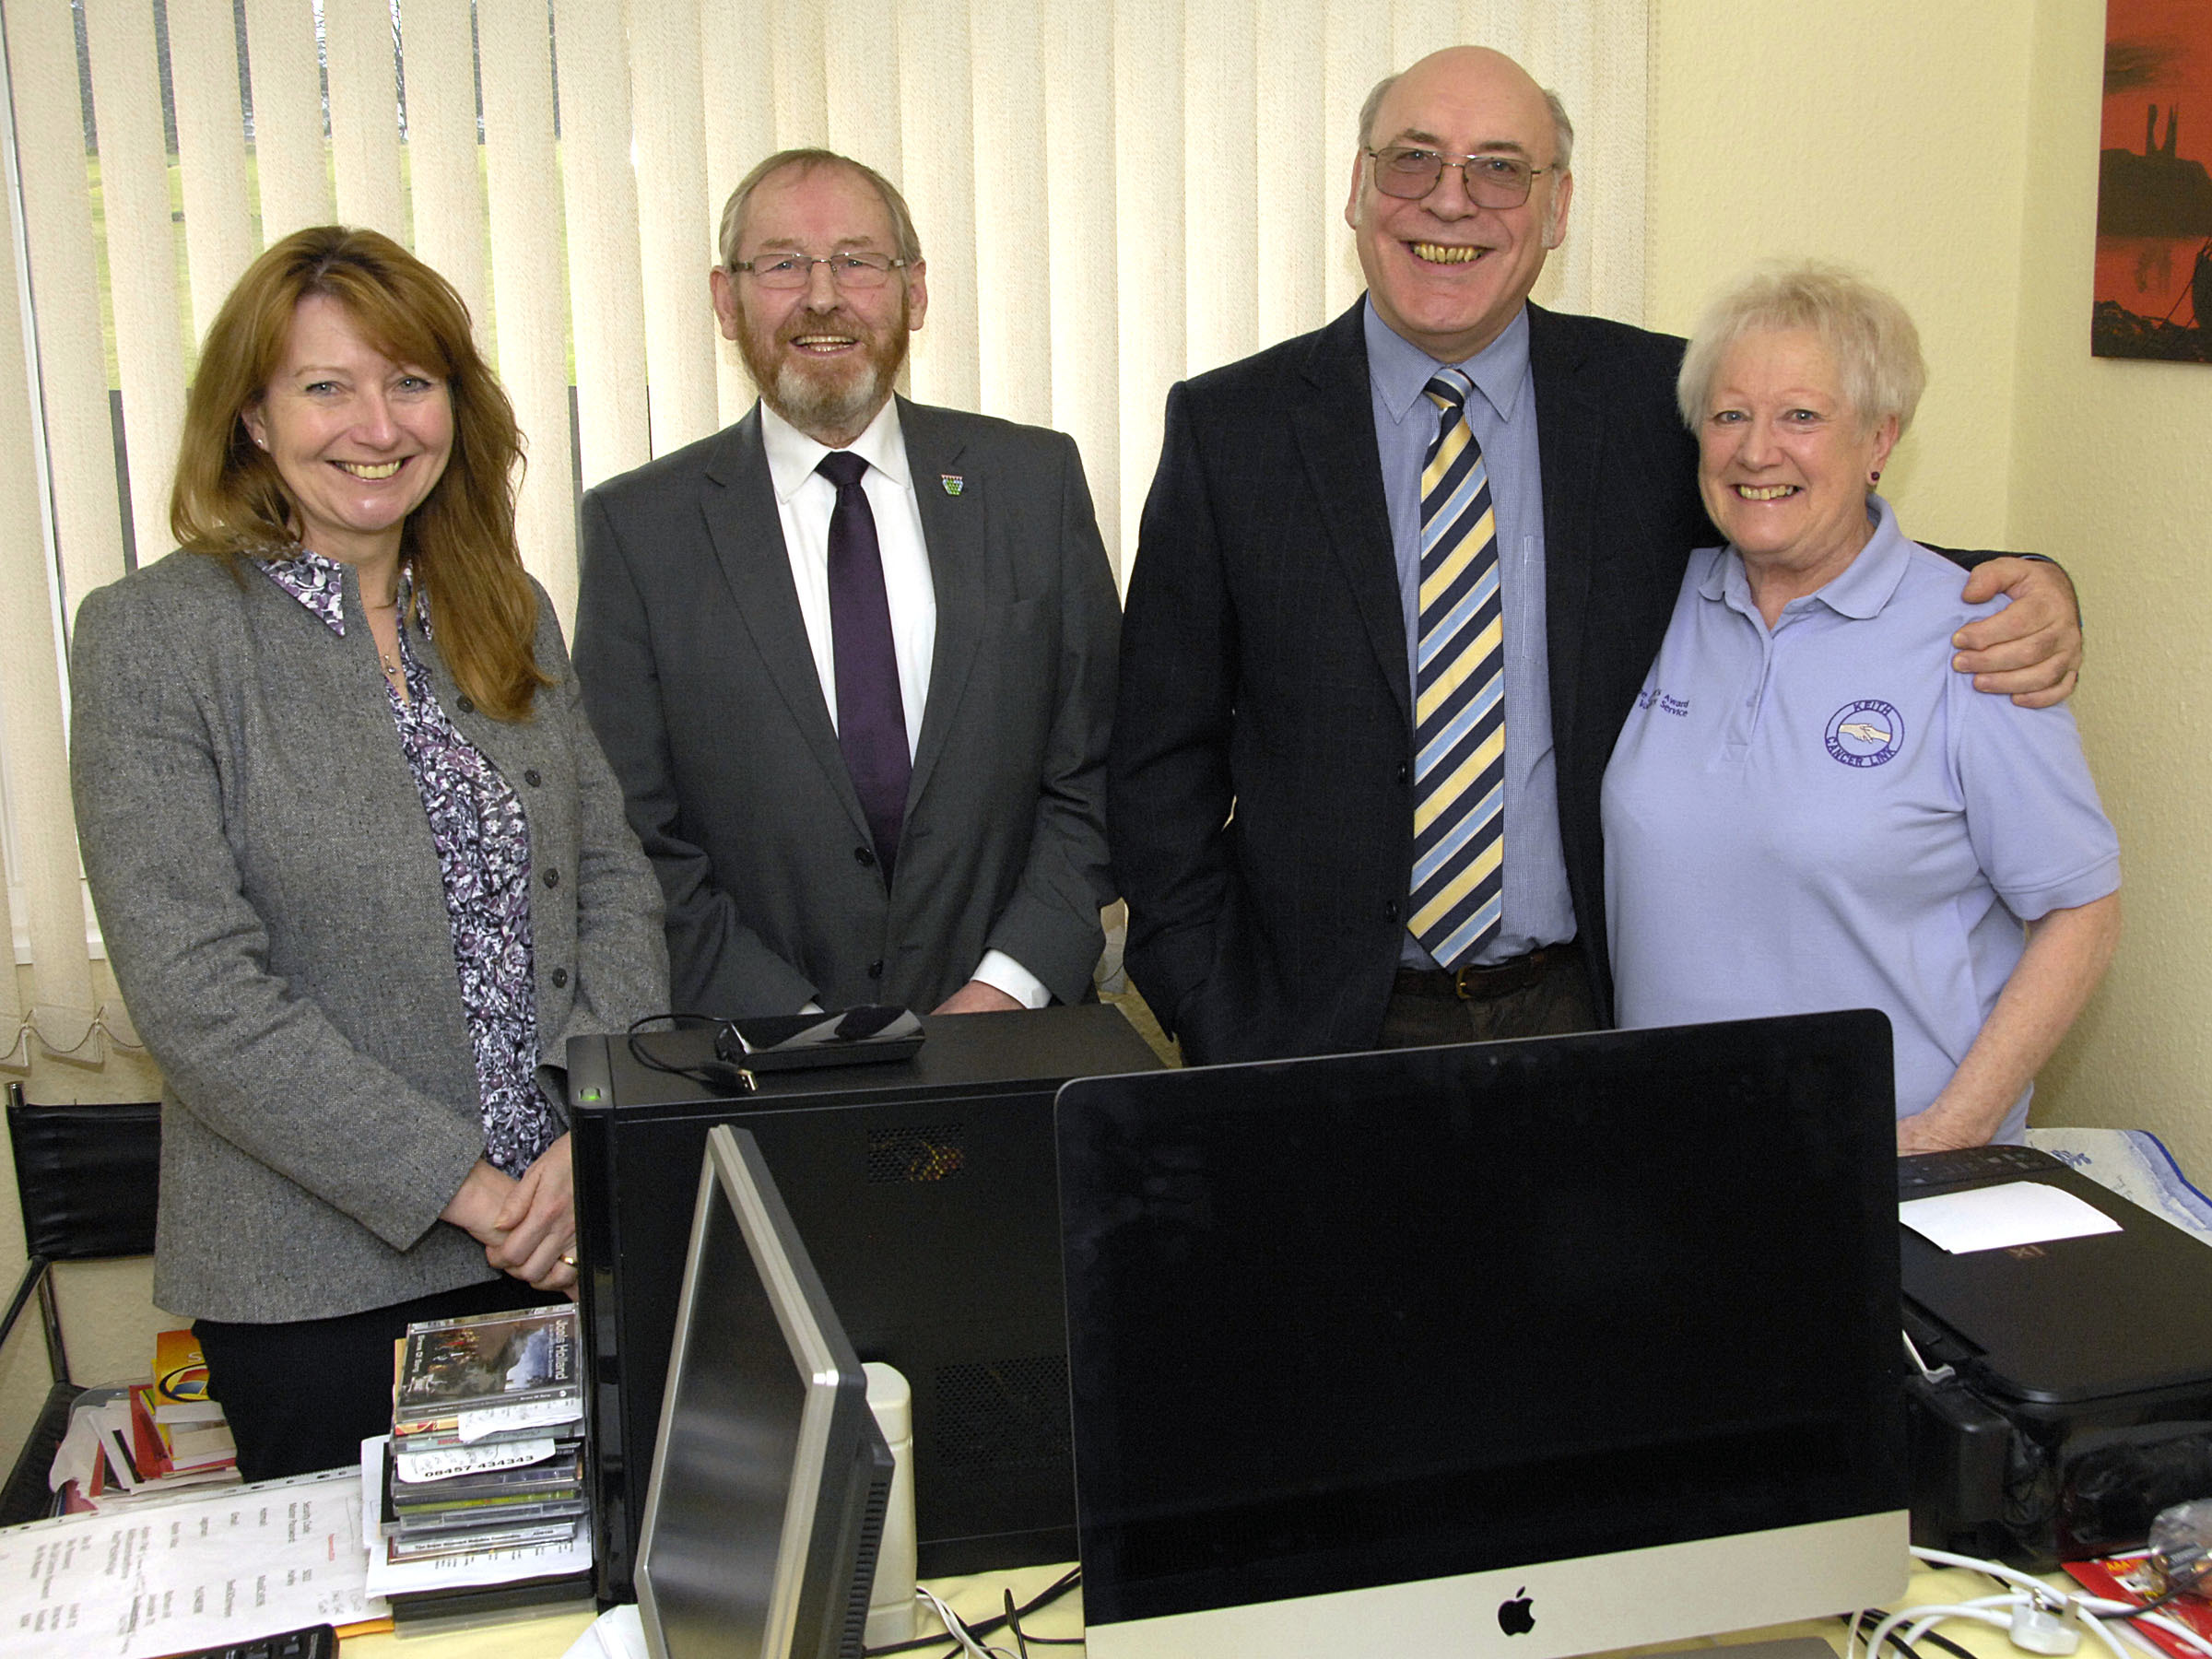 L-R: Keith Cancer Link, Rosemary Pannell, Councillor Ron Shepherd, Councillor Stewart Cree and Adeline Reid.